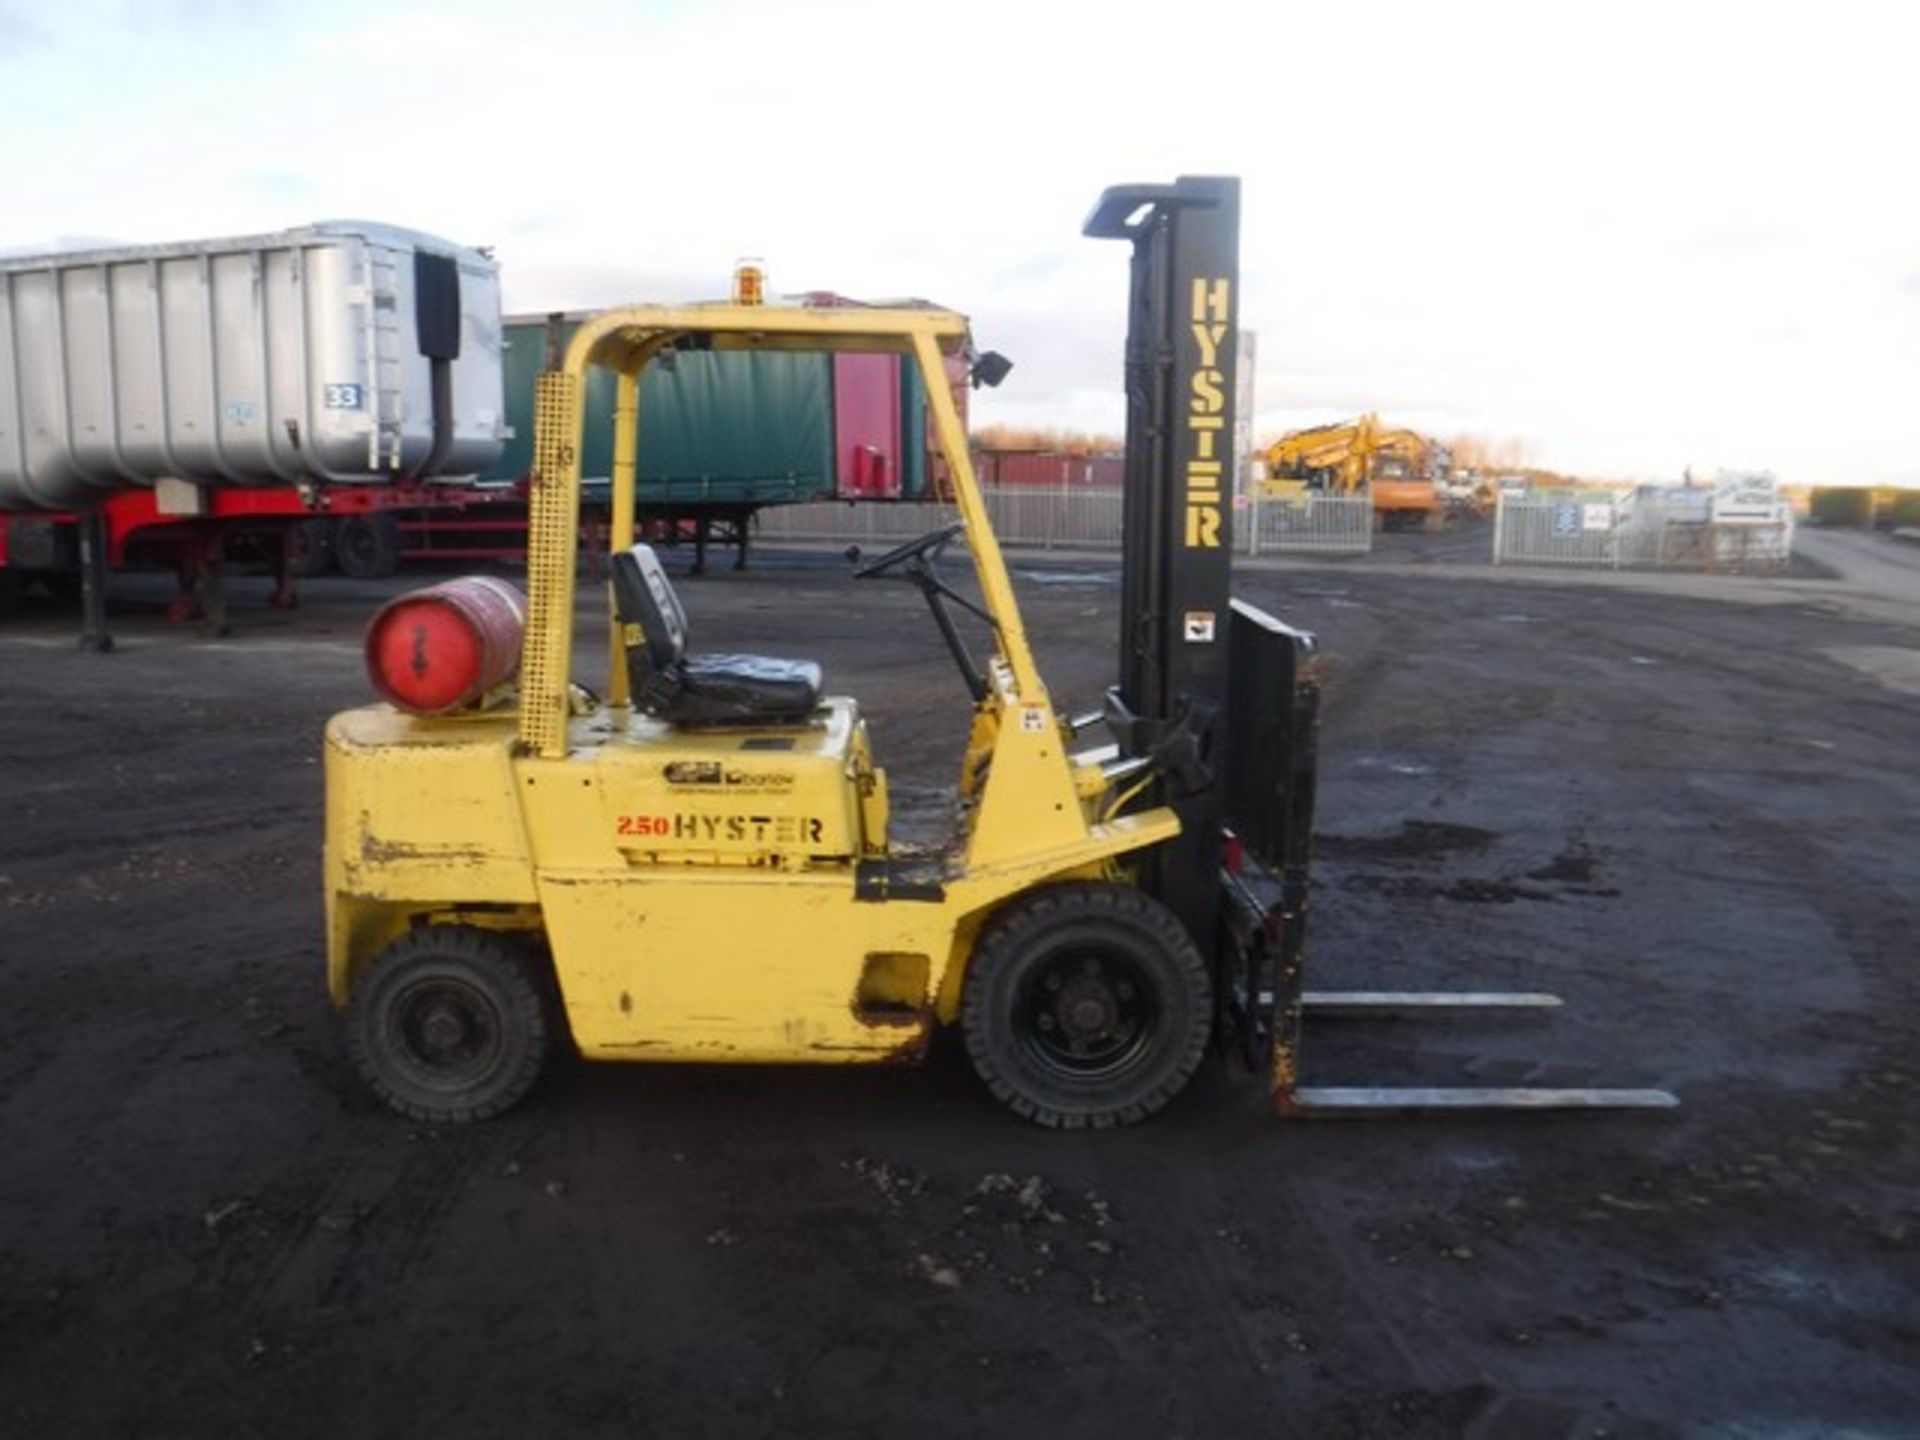 1989 HYSTER H2.50XL 2.5 tone gas forklift c/w side shift. S/NA177B36136K 650hrs (not verified) - Image 4 of 11